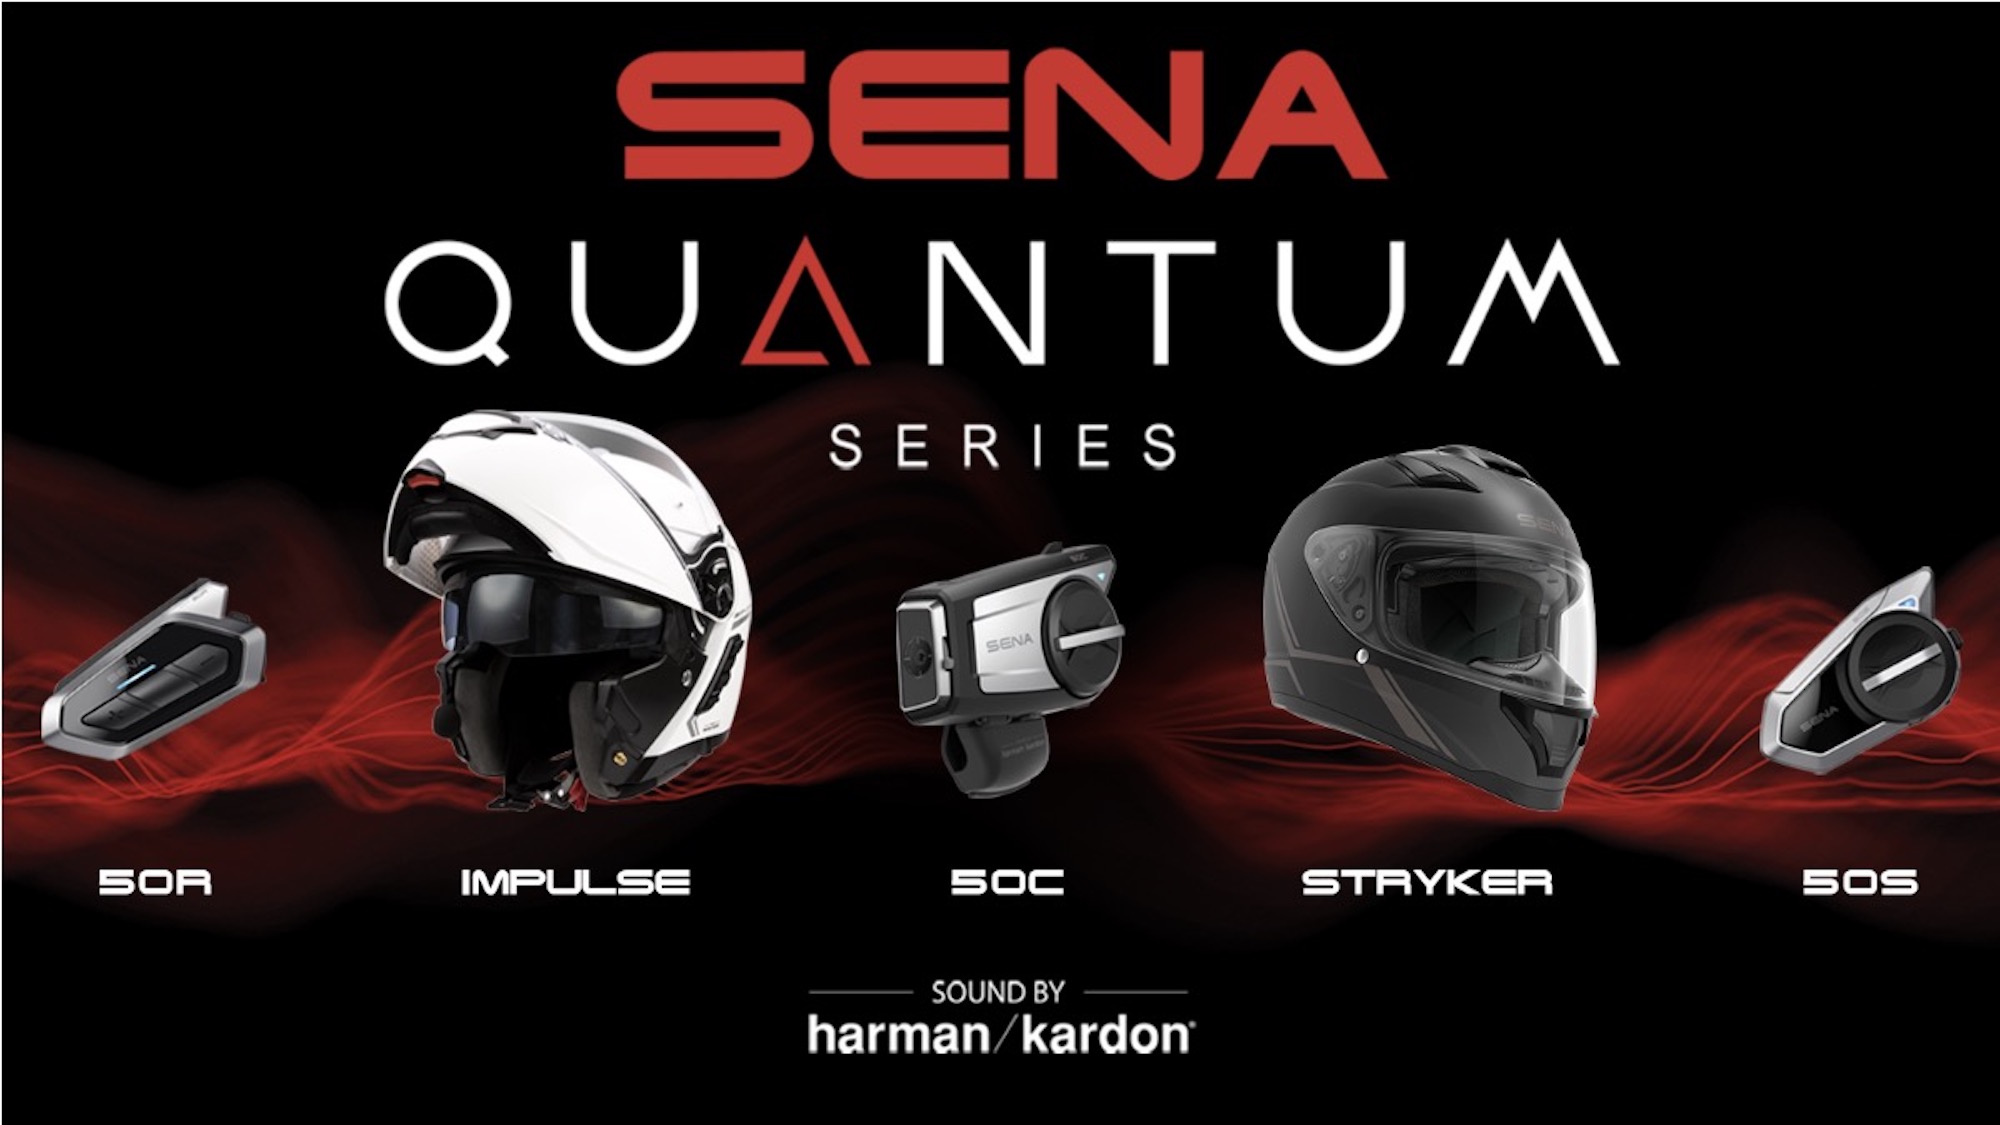 The Senate Quantum series. All media sourced from Sena's relevant (and recent) press release.